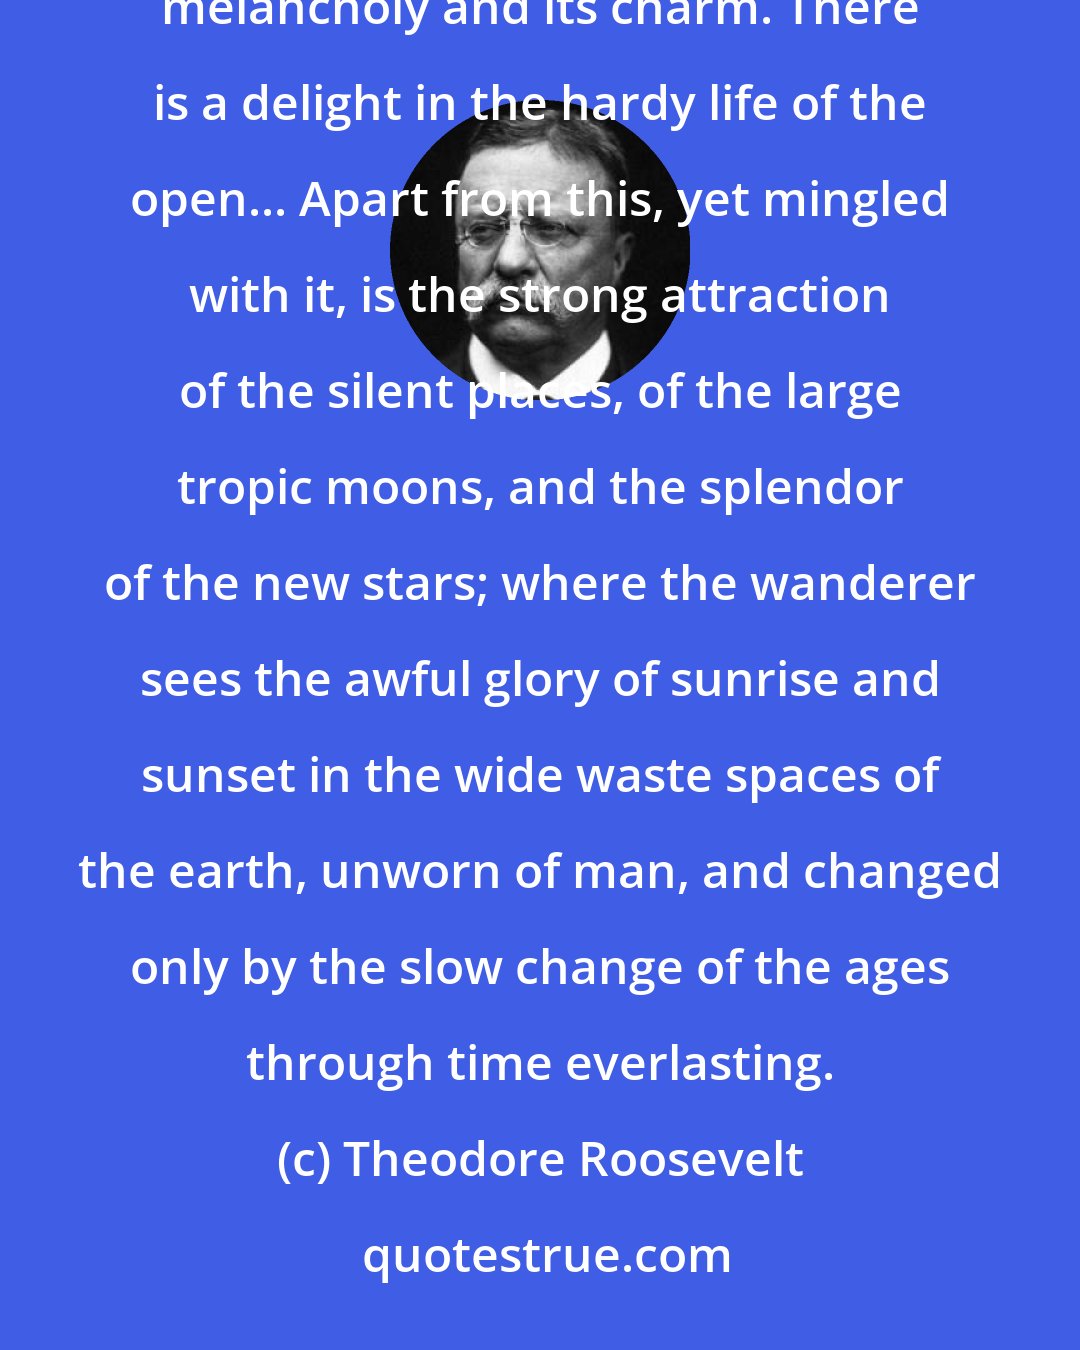 Theodore Roosevelt: There are no words that can tell the hidden spirit of the wilderness, that can reveal its mystery, its melancholy and its charm. There is a delight in the hardy life of the open... Apart from this, yet mingled with it, is the strong attraction of the silent places, of the large tropic moons, and the splendor of the new stars; where the wanderer sees the awful glory of sunrise and sunset in the wide waste spaces of the earth, unworn of man, and changed only by the slow change of the ages through time everlasting.